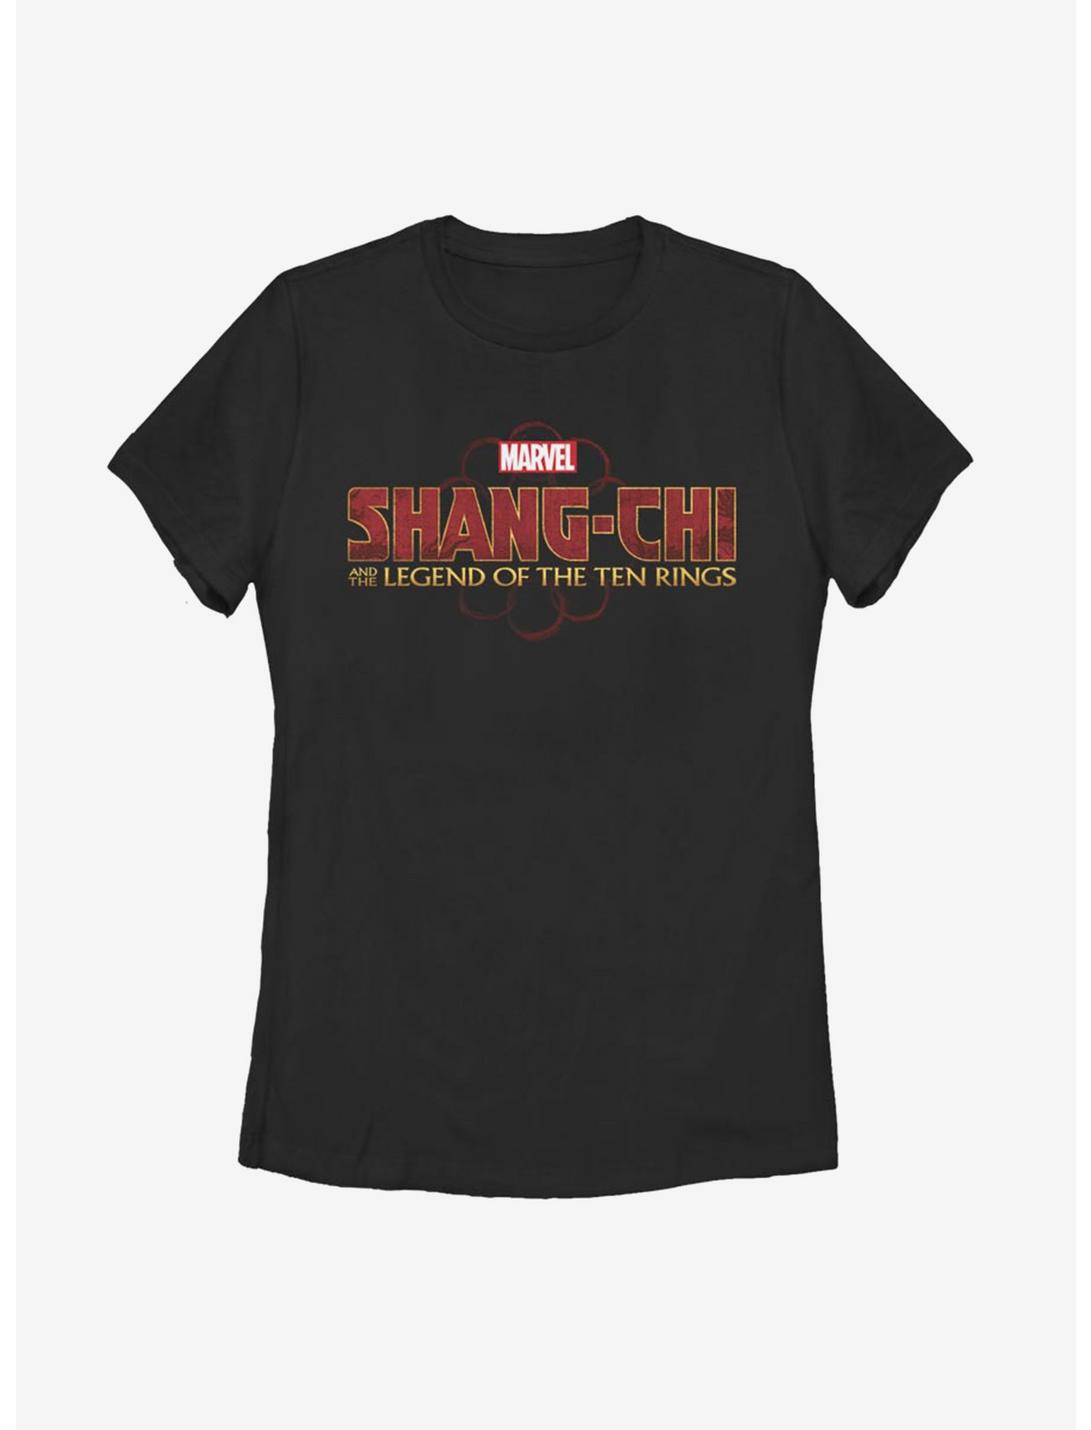 Marvel Shang-Chi And The Legend Of The Ten Rings Womens T-Shirt, BLACK, hi-res